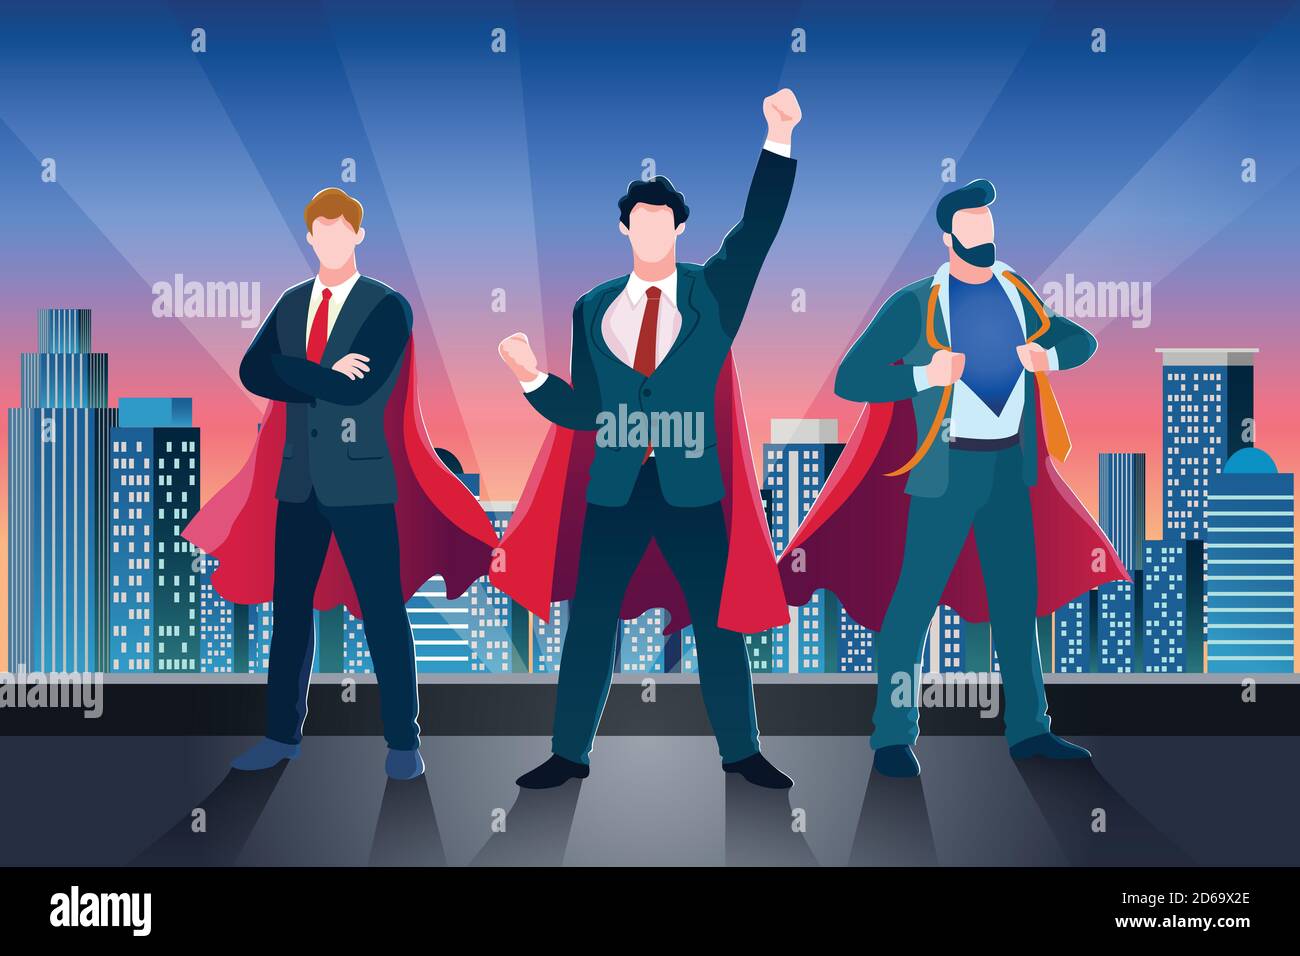 Businessmen in red superhero cloaks and suits on building roof. Vector business metaphor illustration. Concept of success teamwork, leadership. Abstra Stock Vector